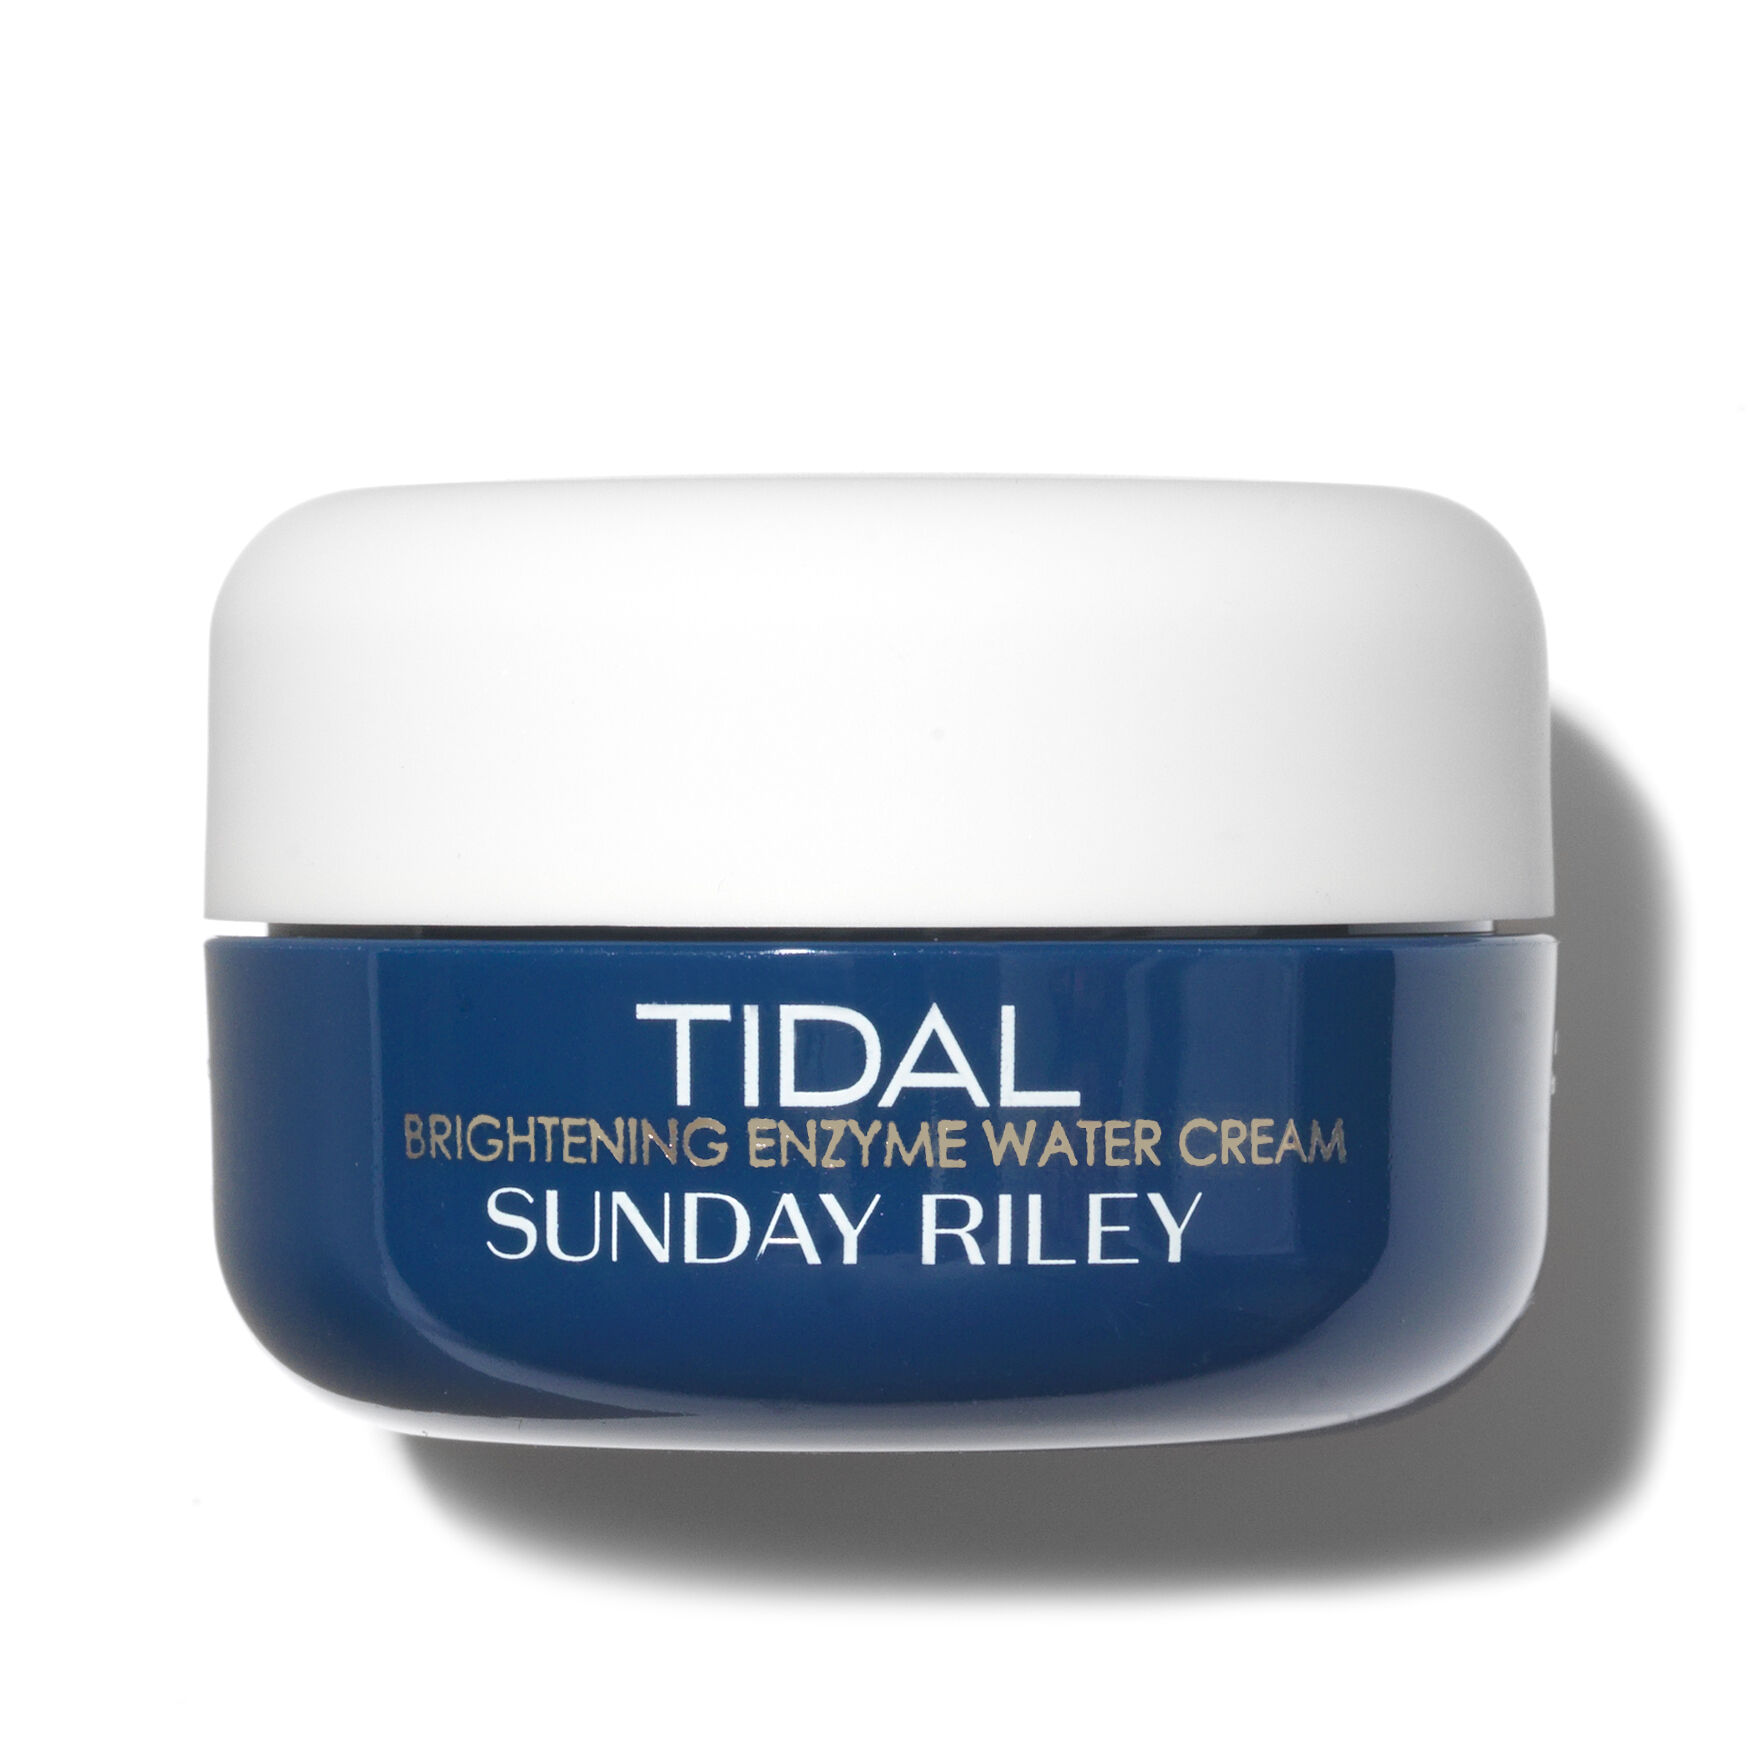 sunday riley tidal replacement